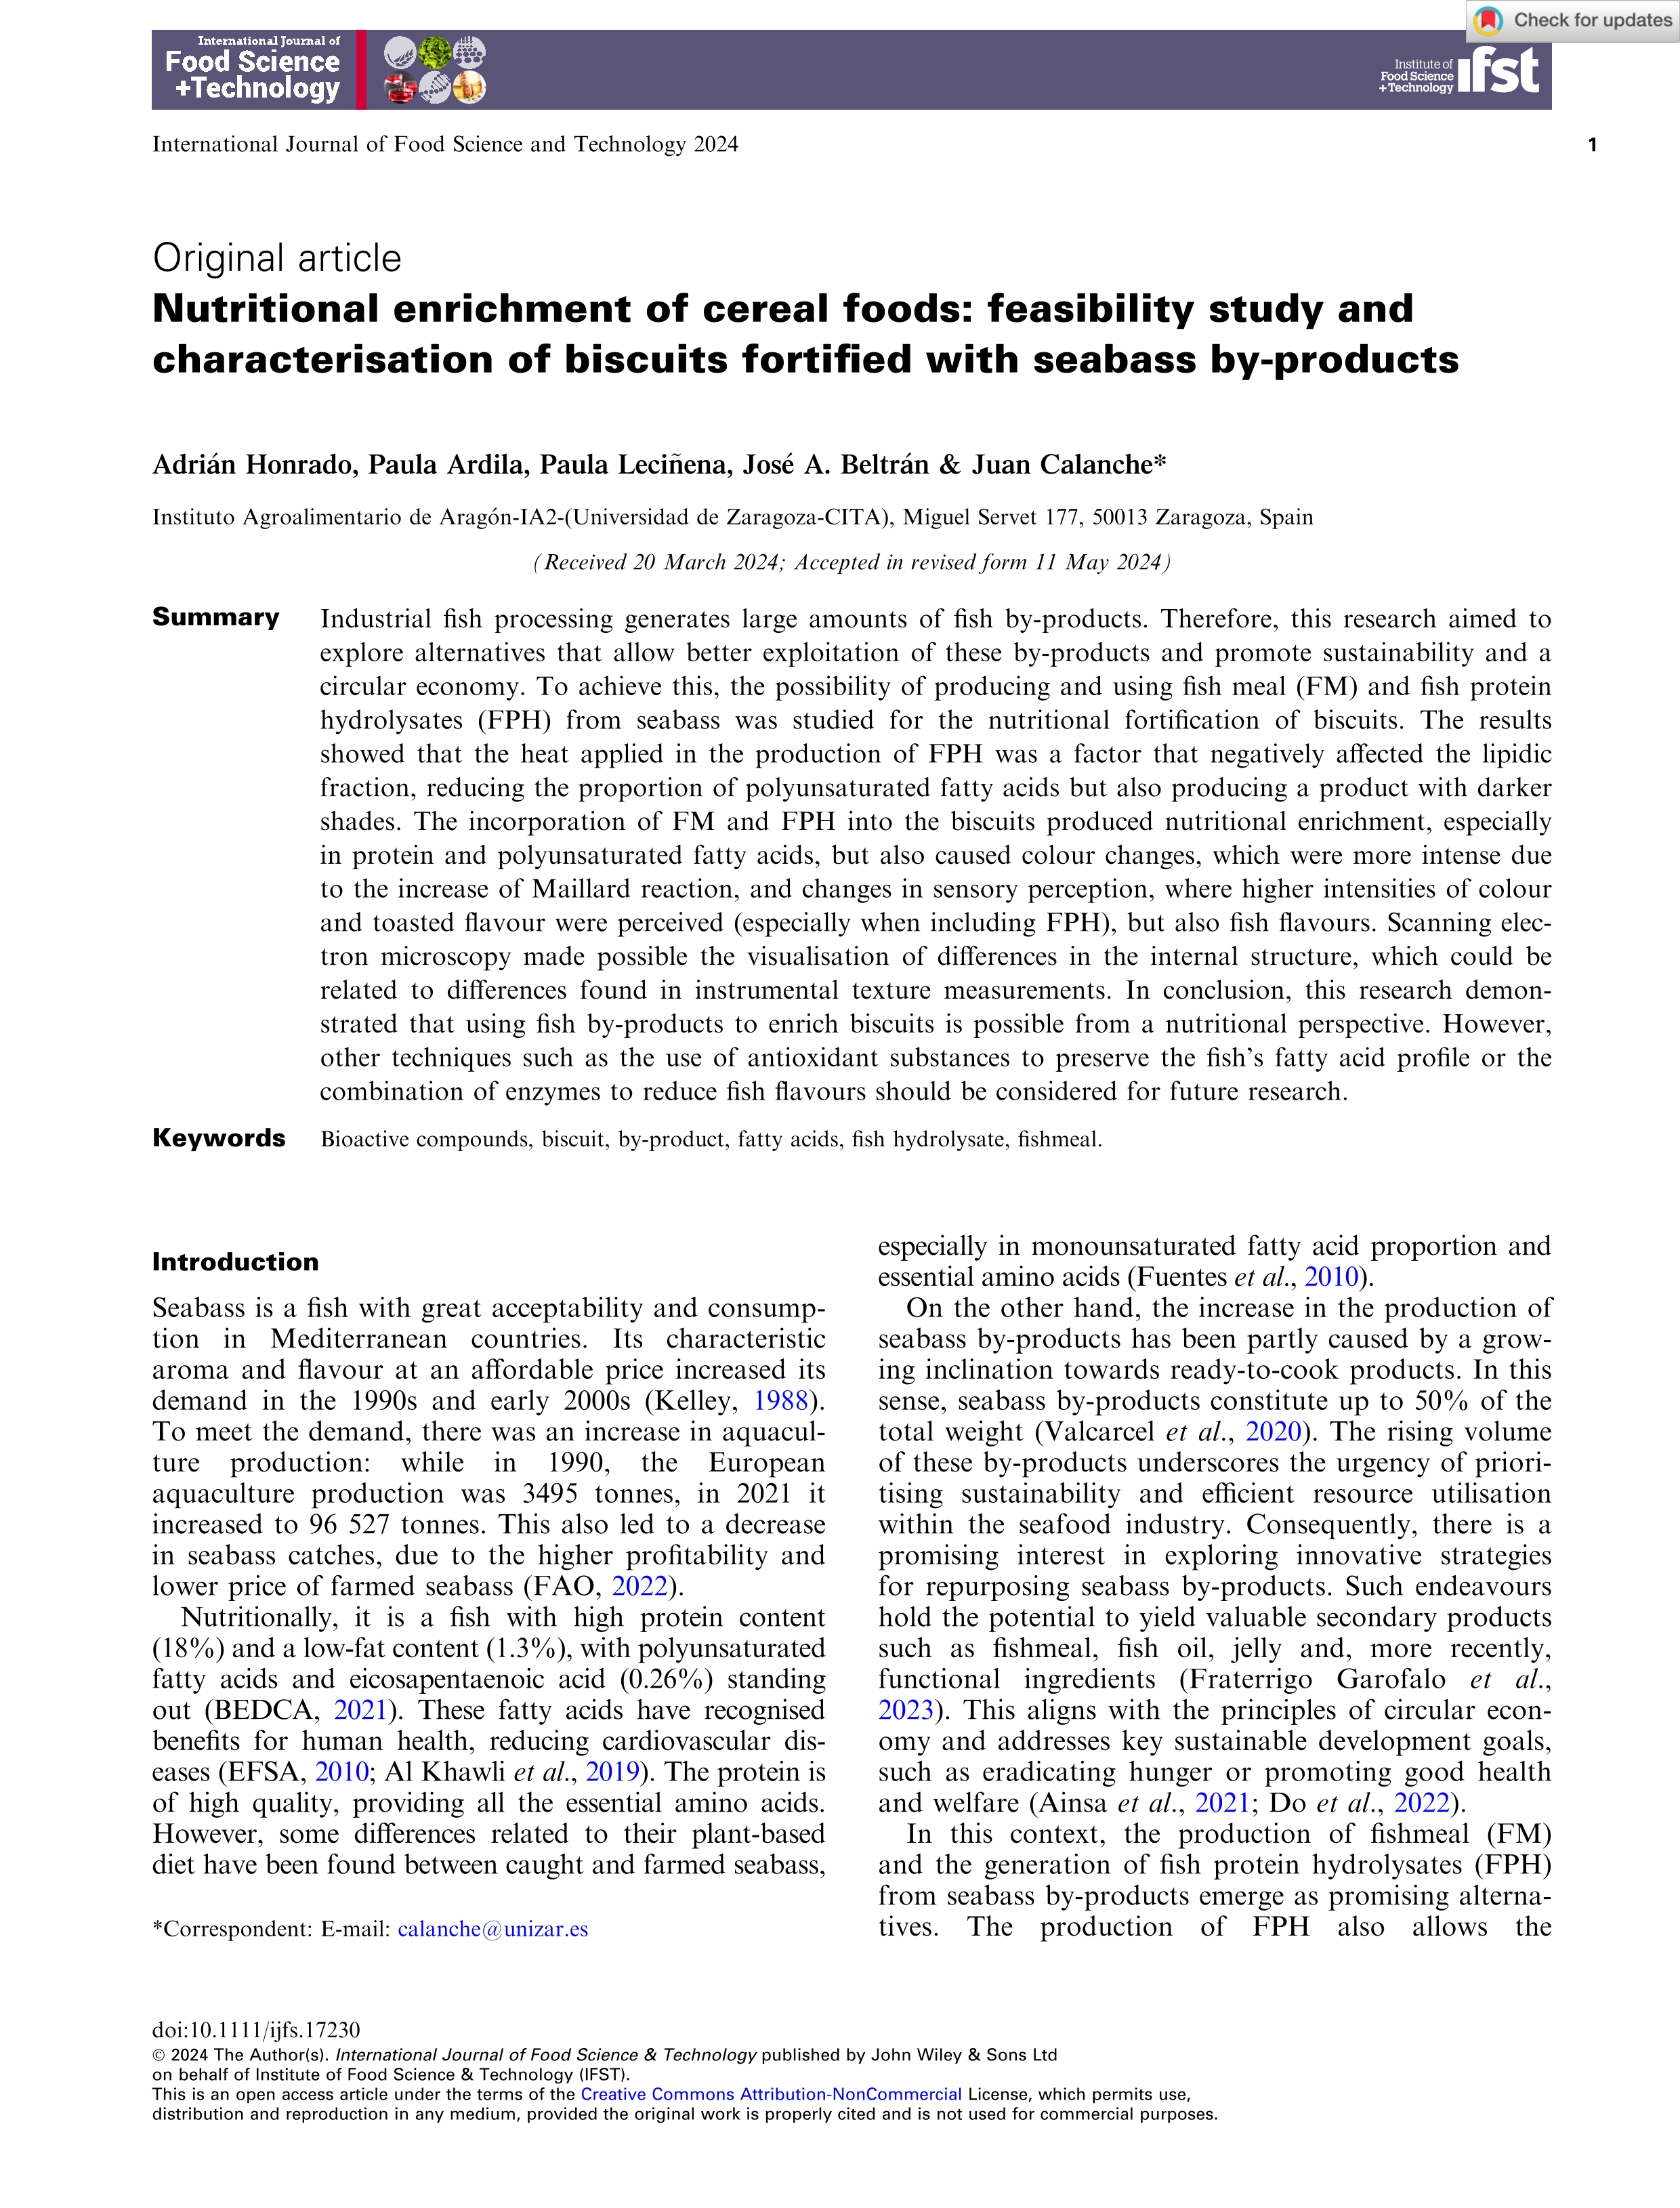 Nutritional enrichment of cereal foods: feasibility study and characterisation of biscuits fortified with seabass by-products